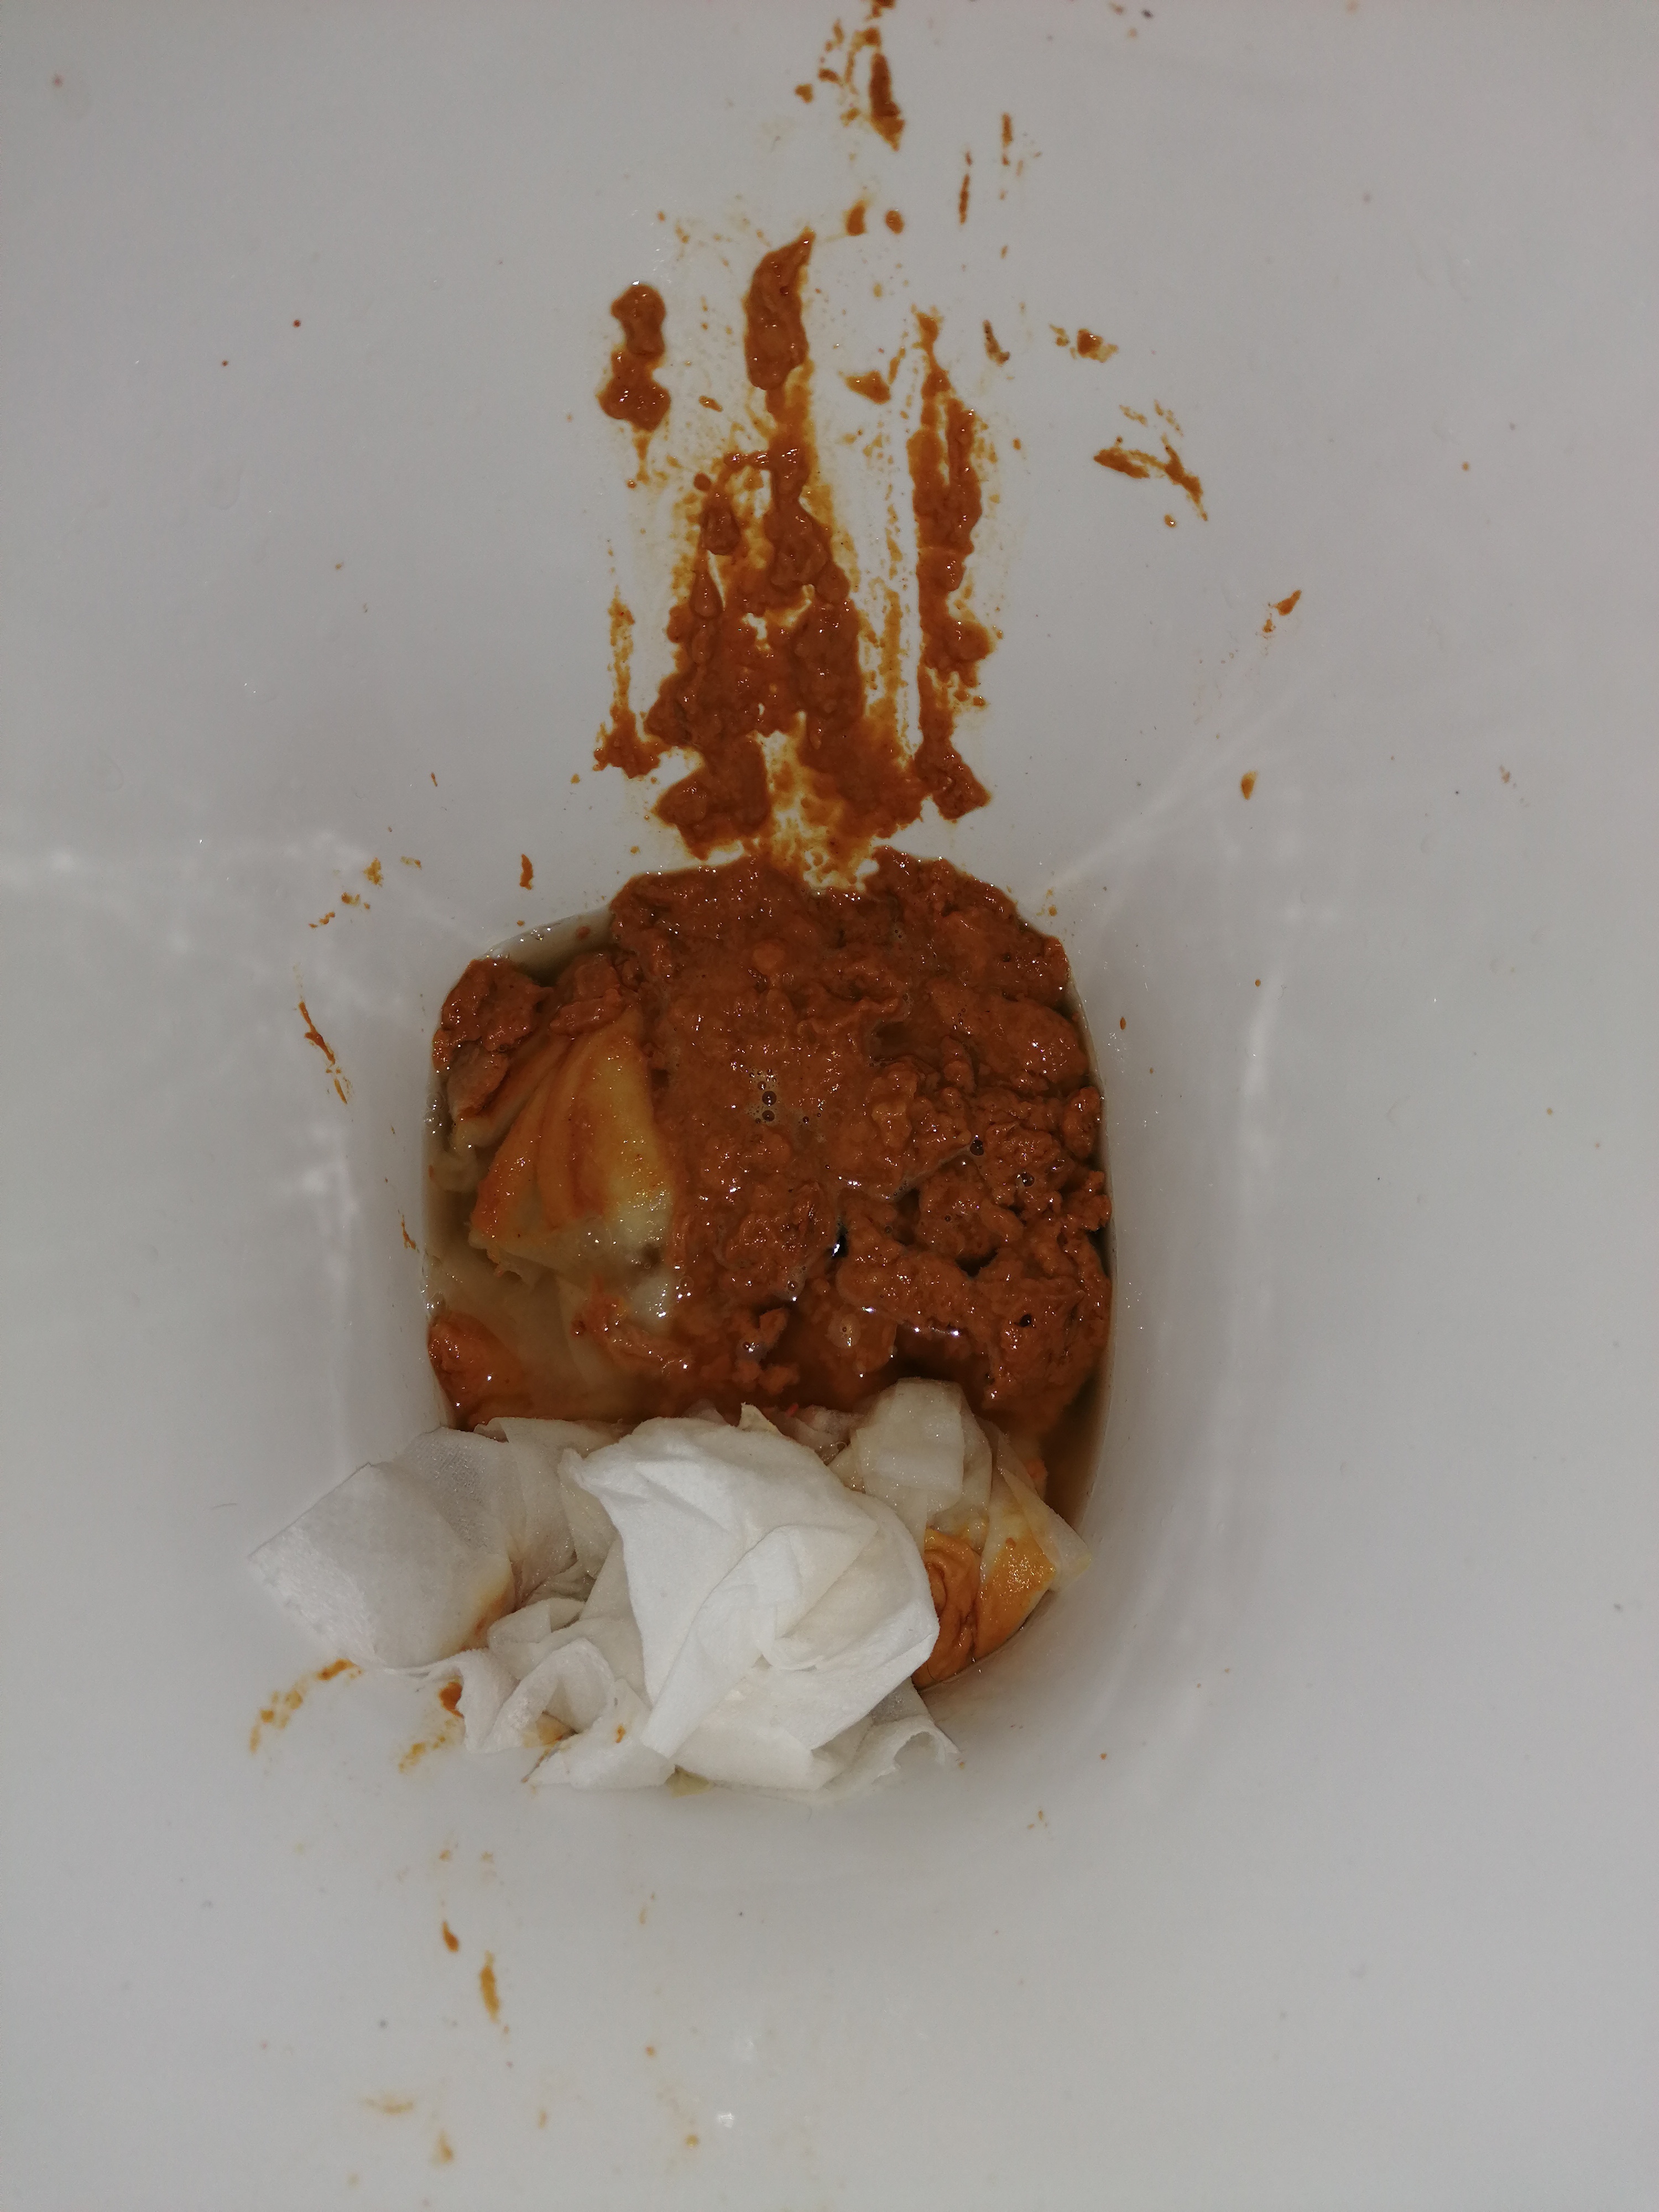 Second bad stomach curry shit on my mates loo